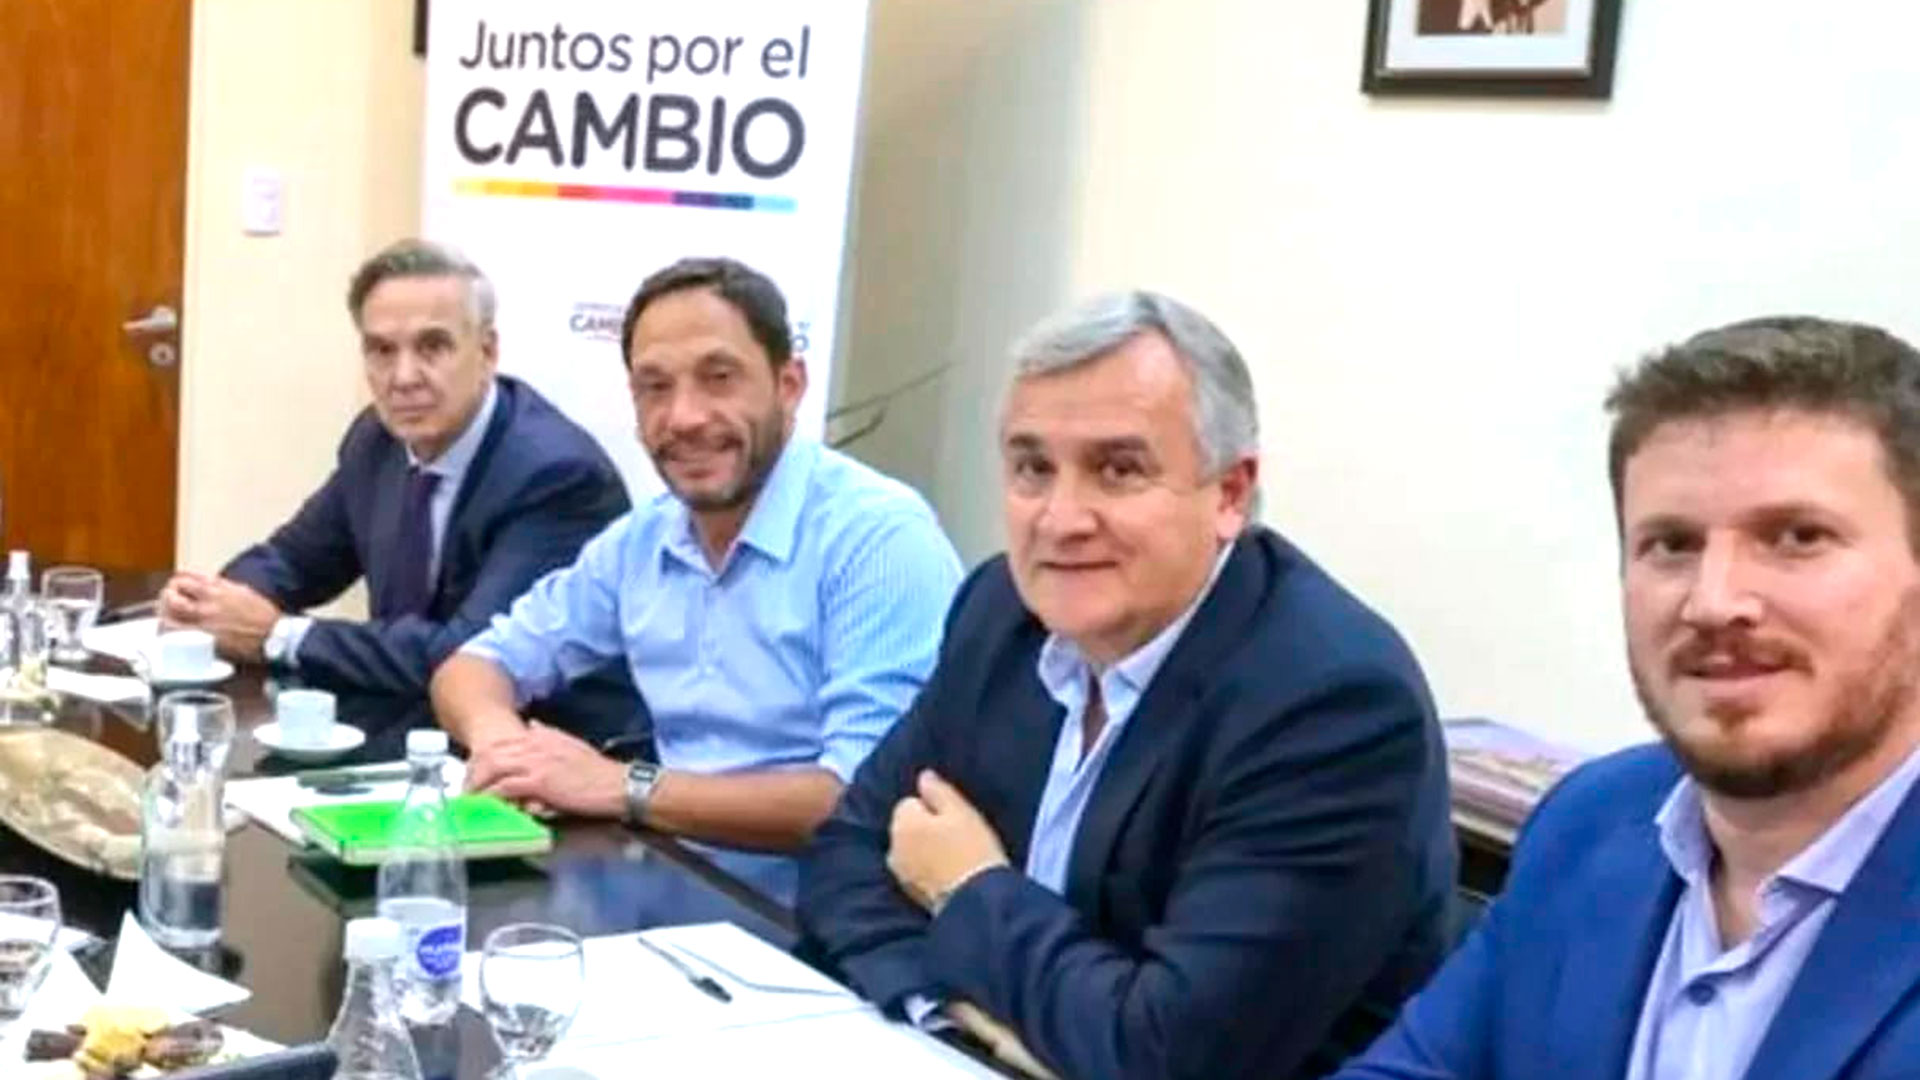 Federico Angelini, Gerardo Morales, Maximiliano Ferraro and Miguel Angel Pichetto, the heads of the Together for Change parties